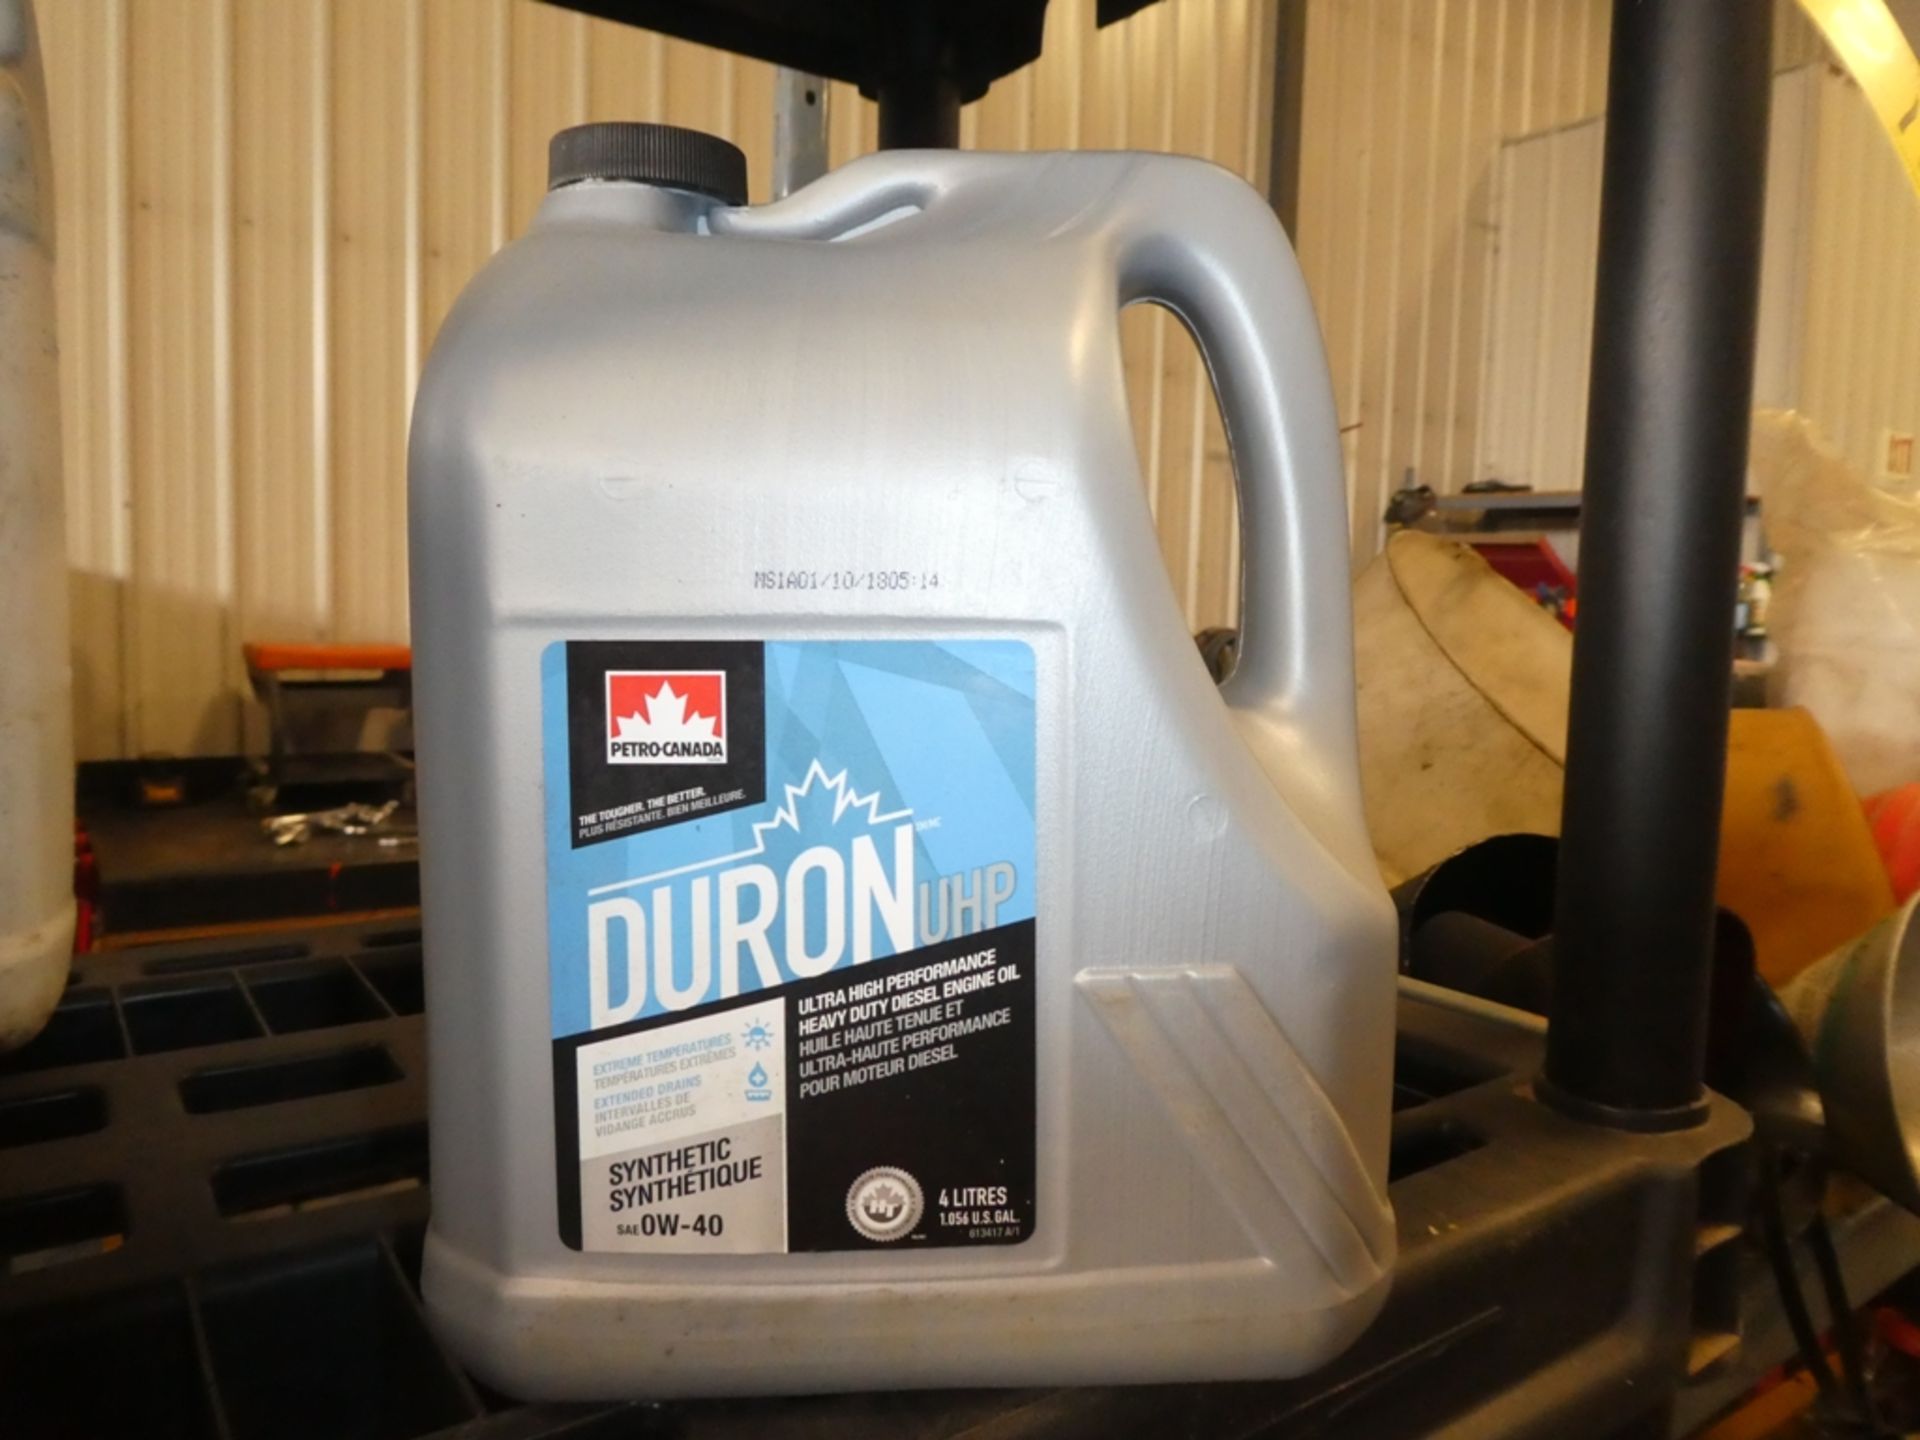 L/O DURON UHP SYNTHETIC HD DIESEL OIL, 5L - SAE30, DMD 5W-40 - Image 2 of 2